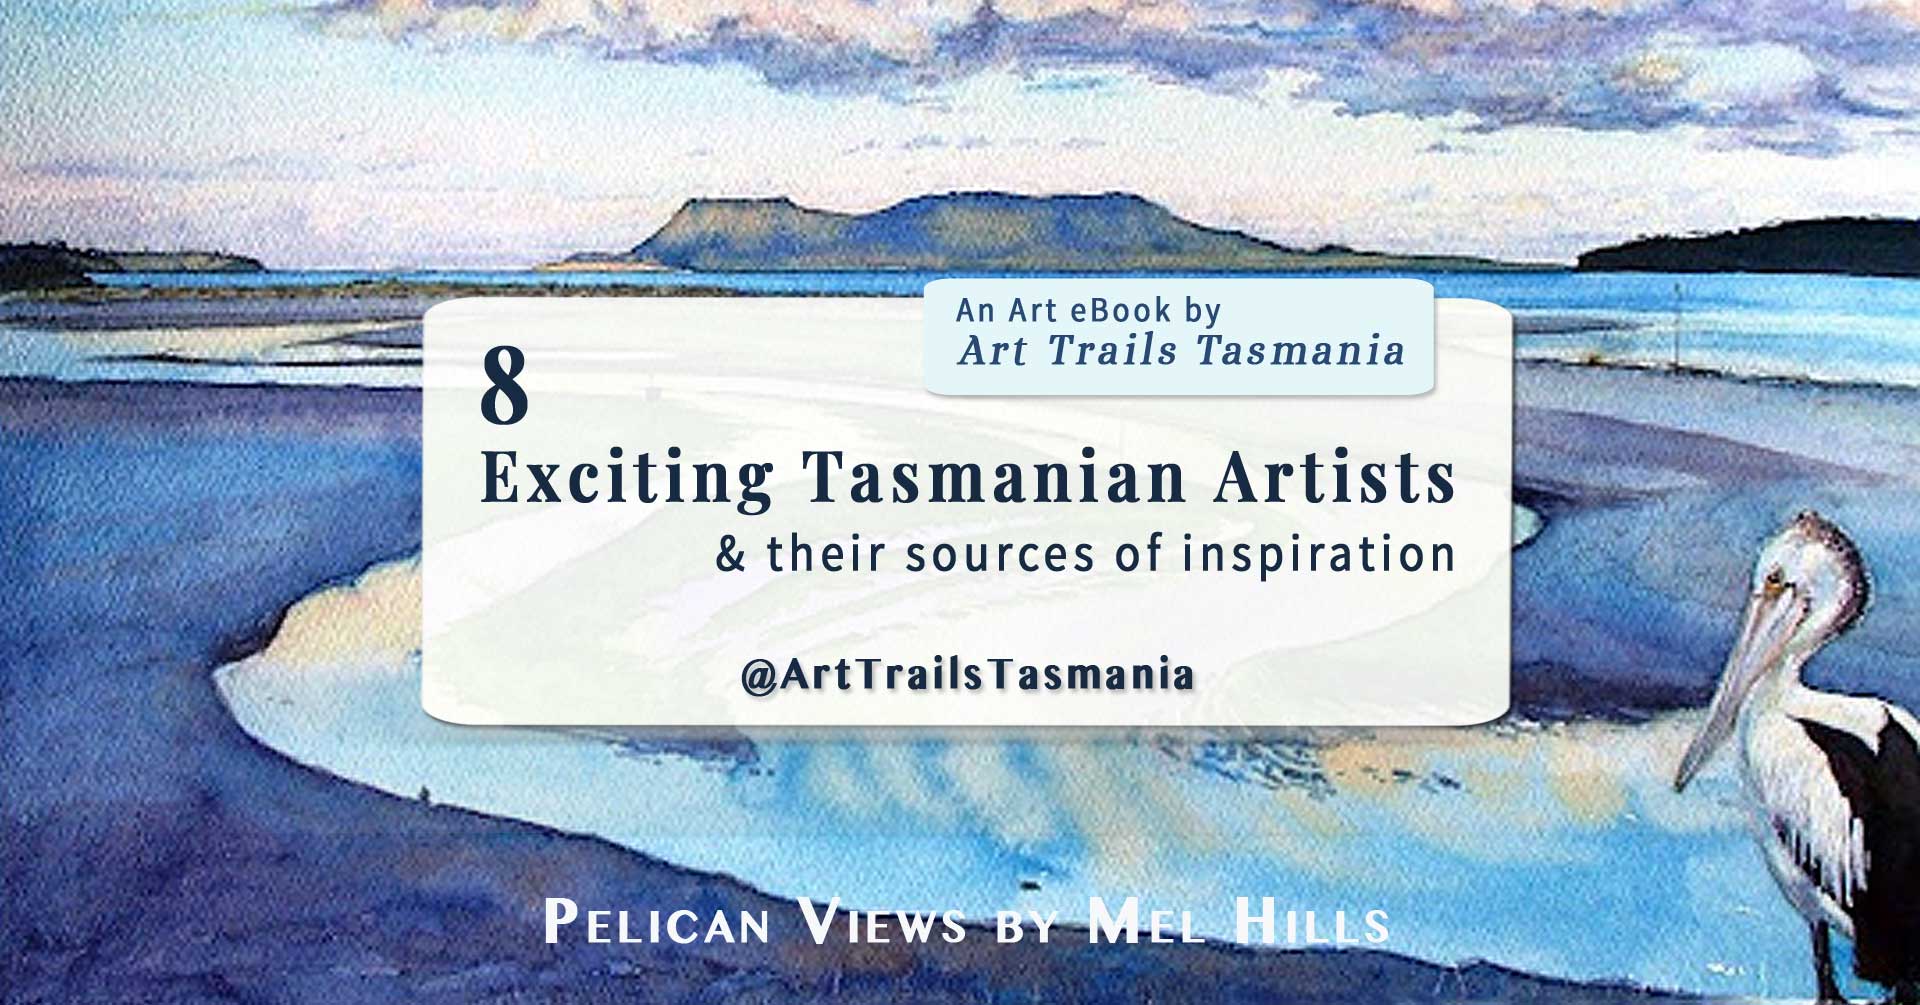 A watercolour painting of a pelican looking over her estuary by Mel Hills 8 Exciting Tasmanian Artists and their sources of inspiration, An Art ebook by Art Trails Tasmania ebook